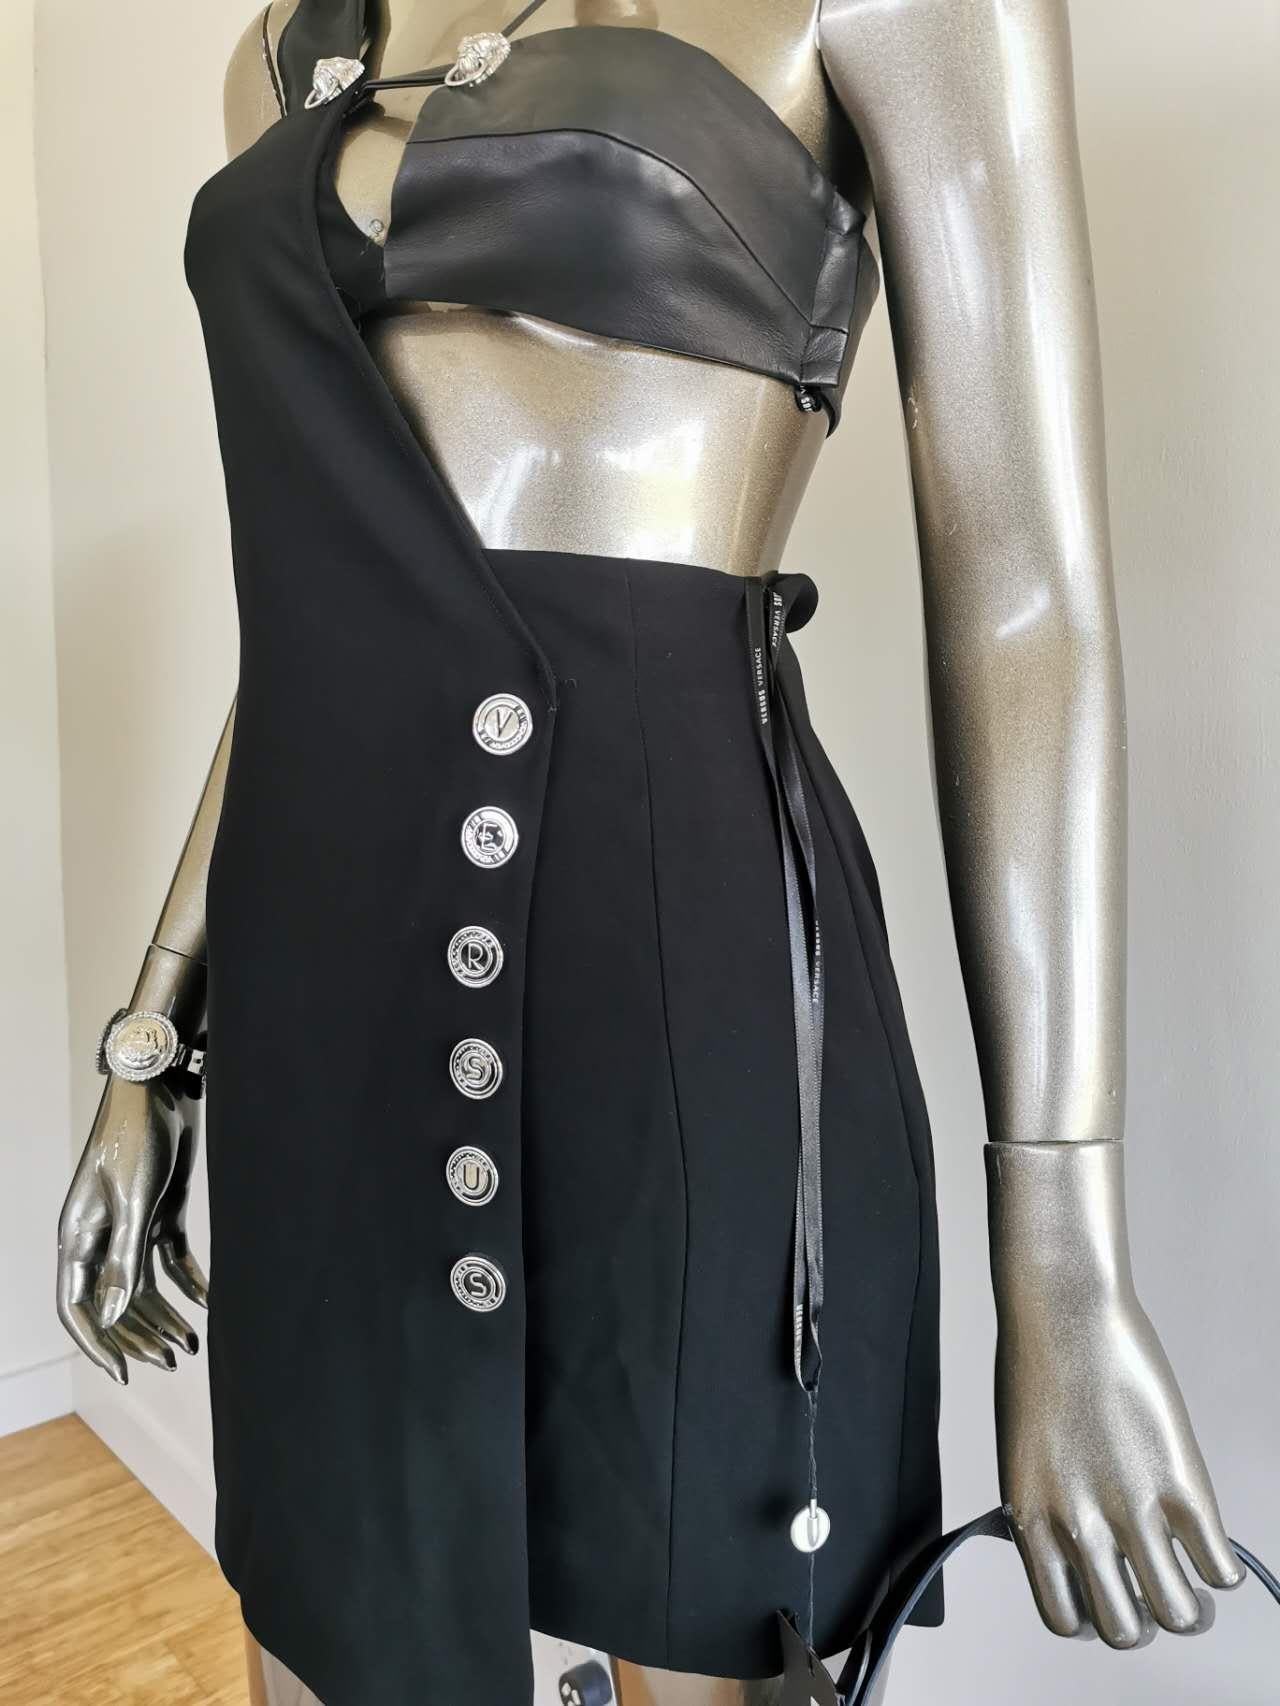 Versus by ANTHONY VACCARELLO Versace Black Lion Assymetrical Cocktail Dress For Sale 8